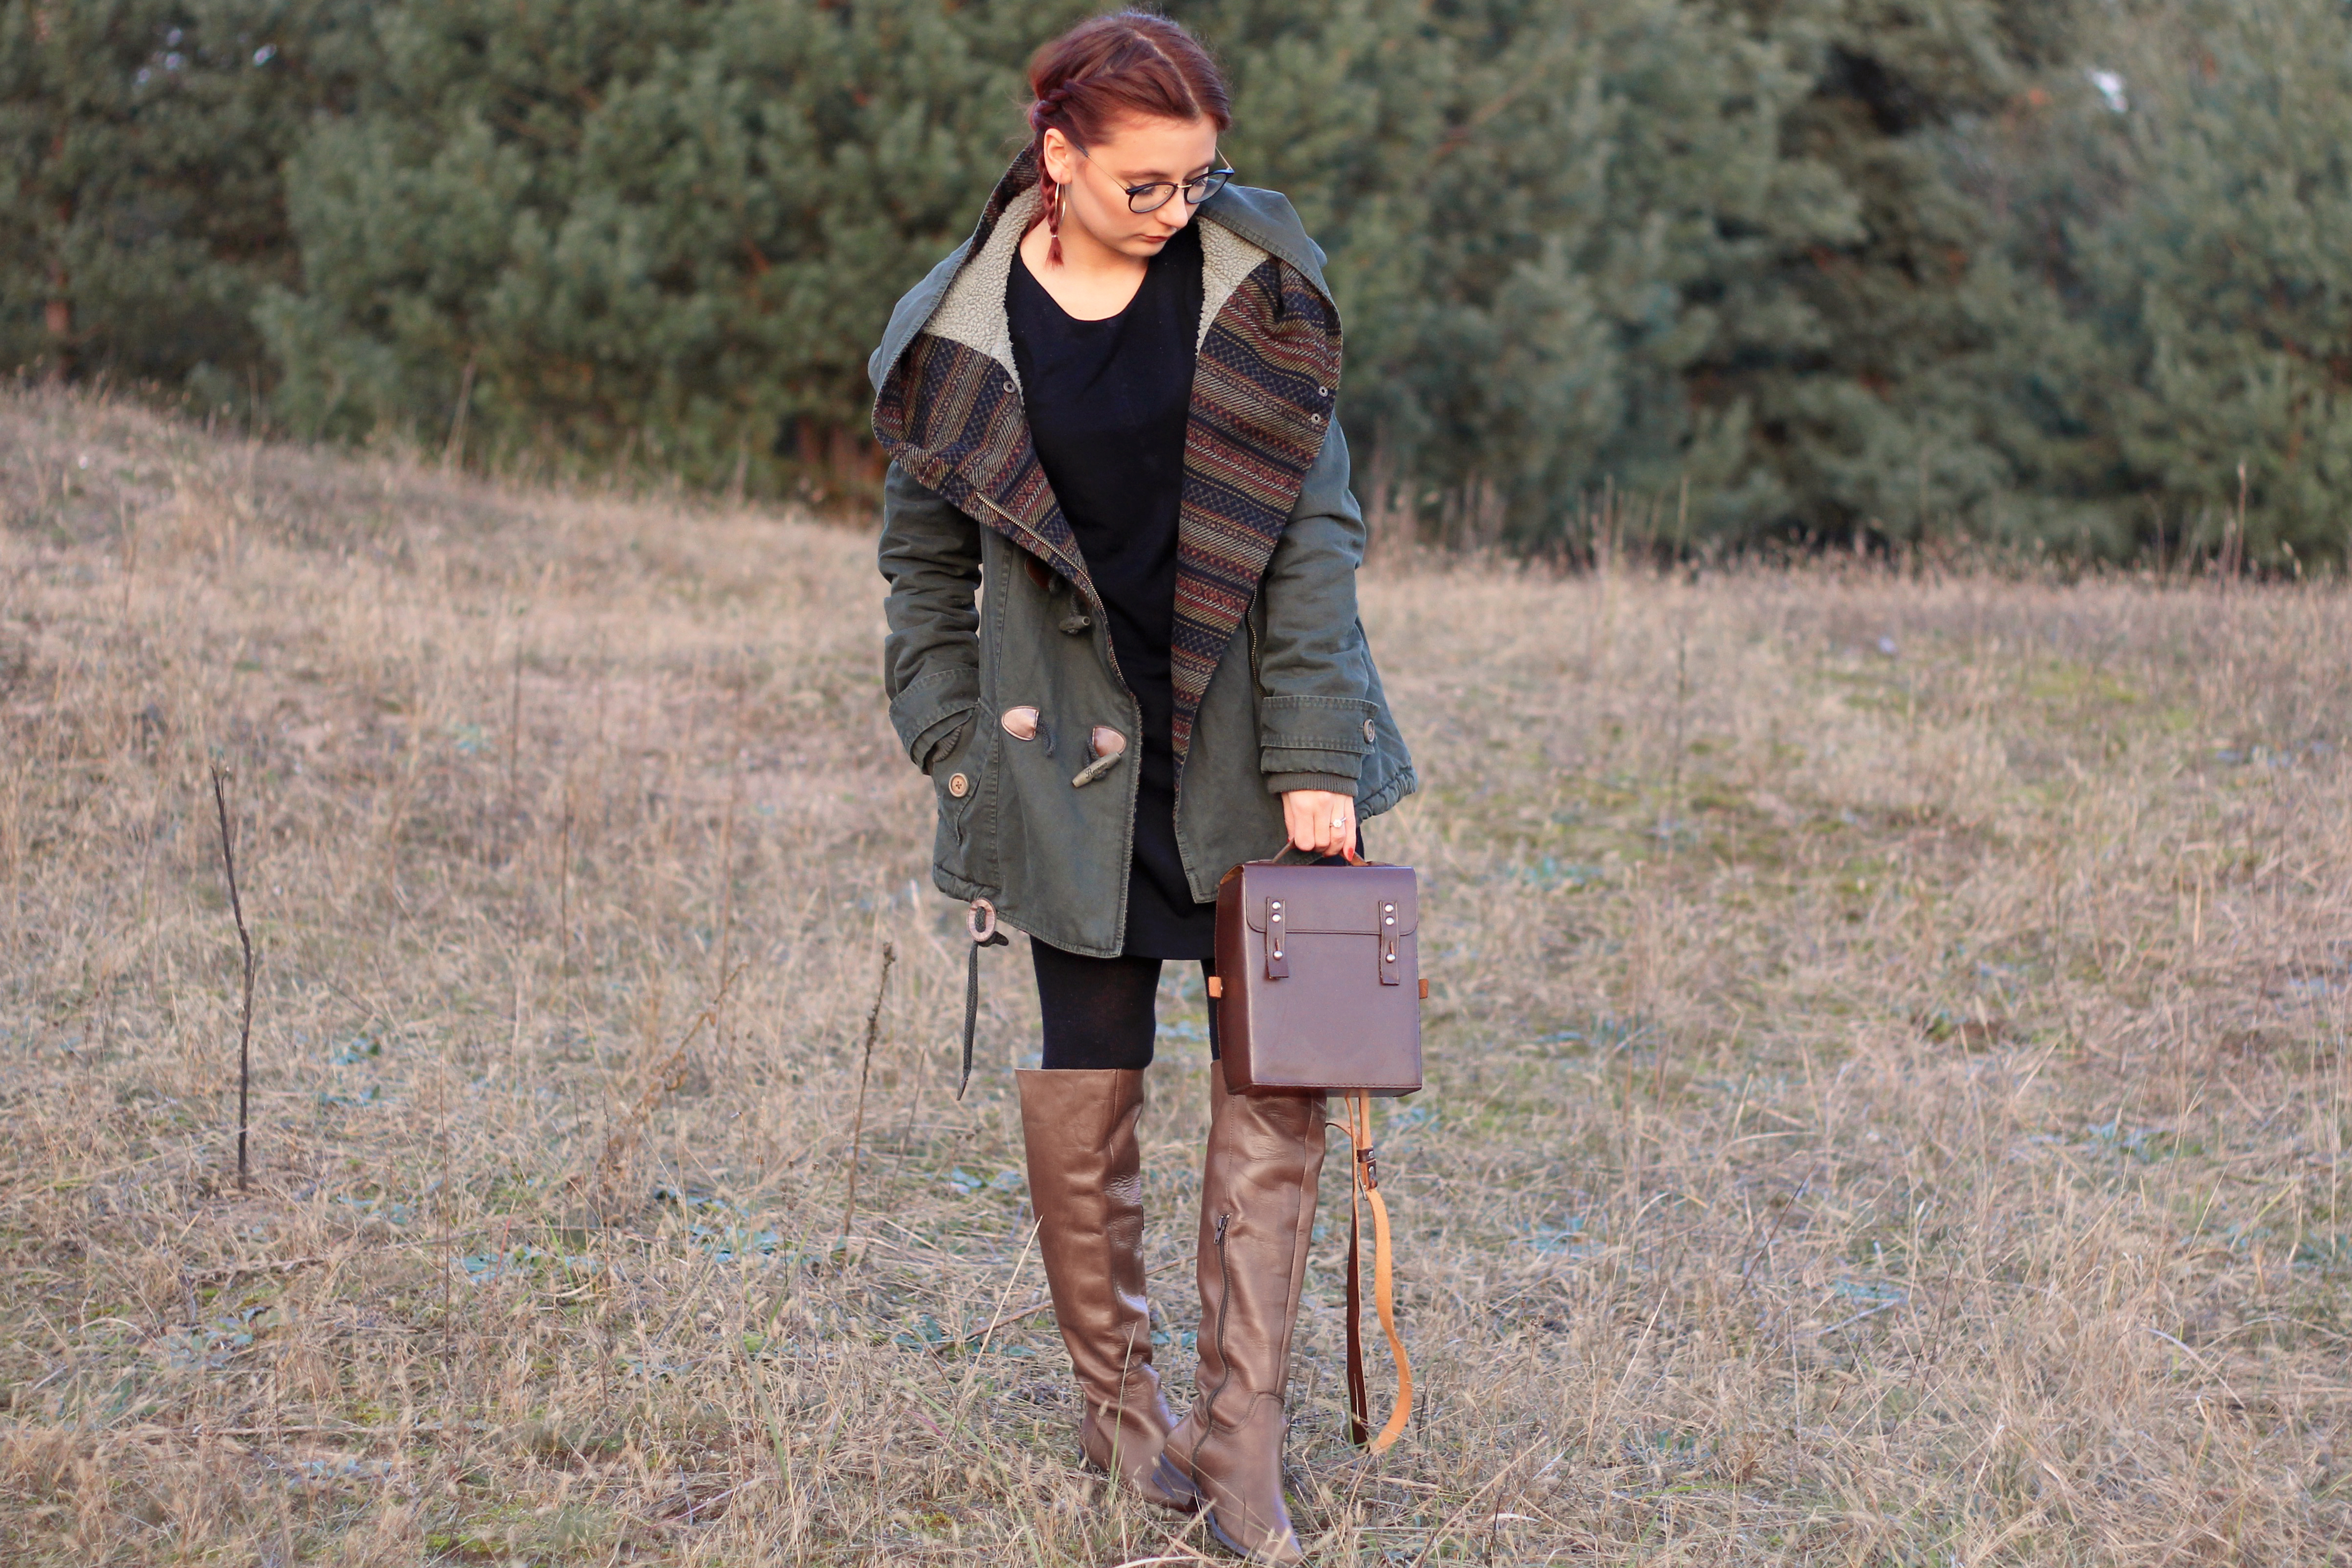 Dafflecoat, layering, kameratasche, stiefel, trend, outfit, ootd, fashionblogger, modeblogger, dearfashion, spaziergang, november, instagram, rote haare, style, lookbook